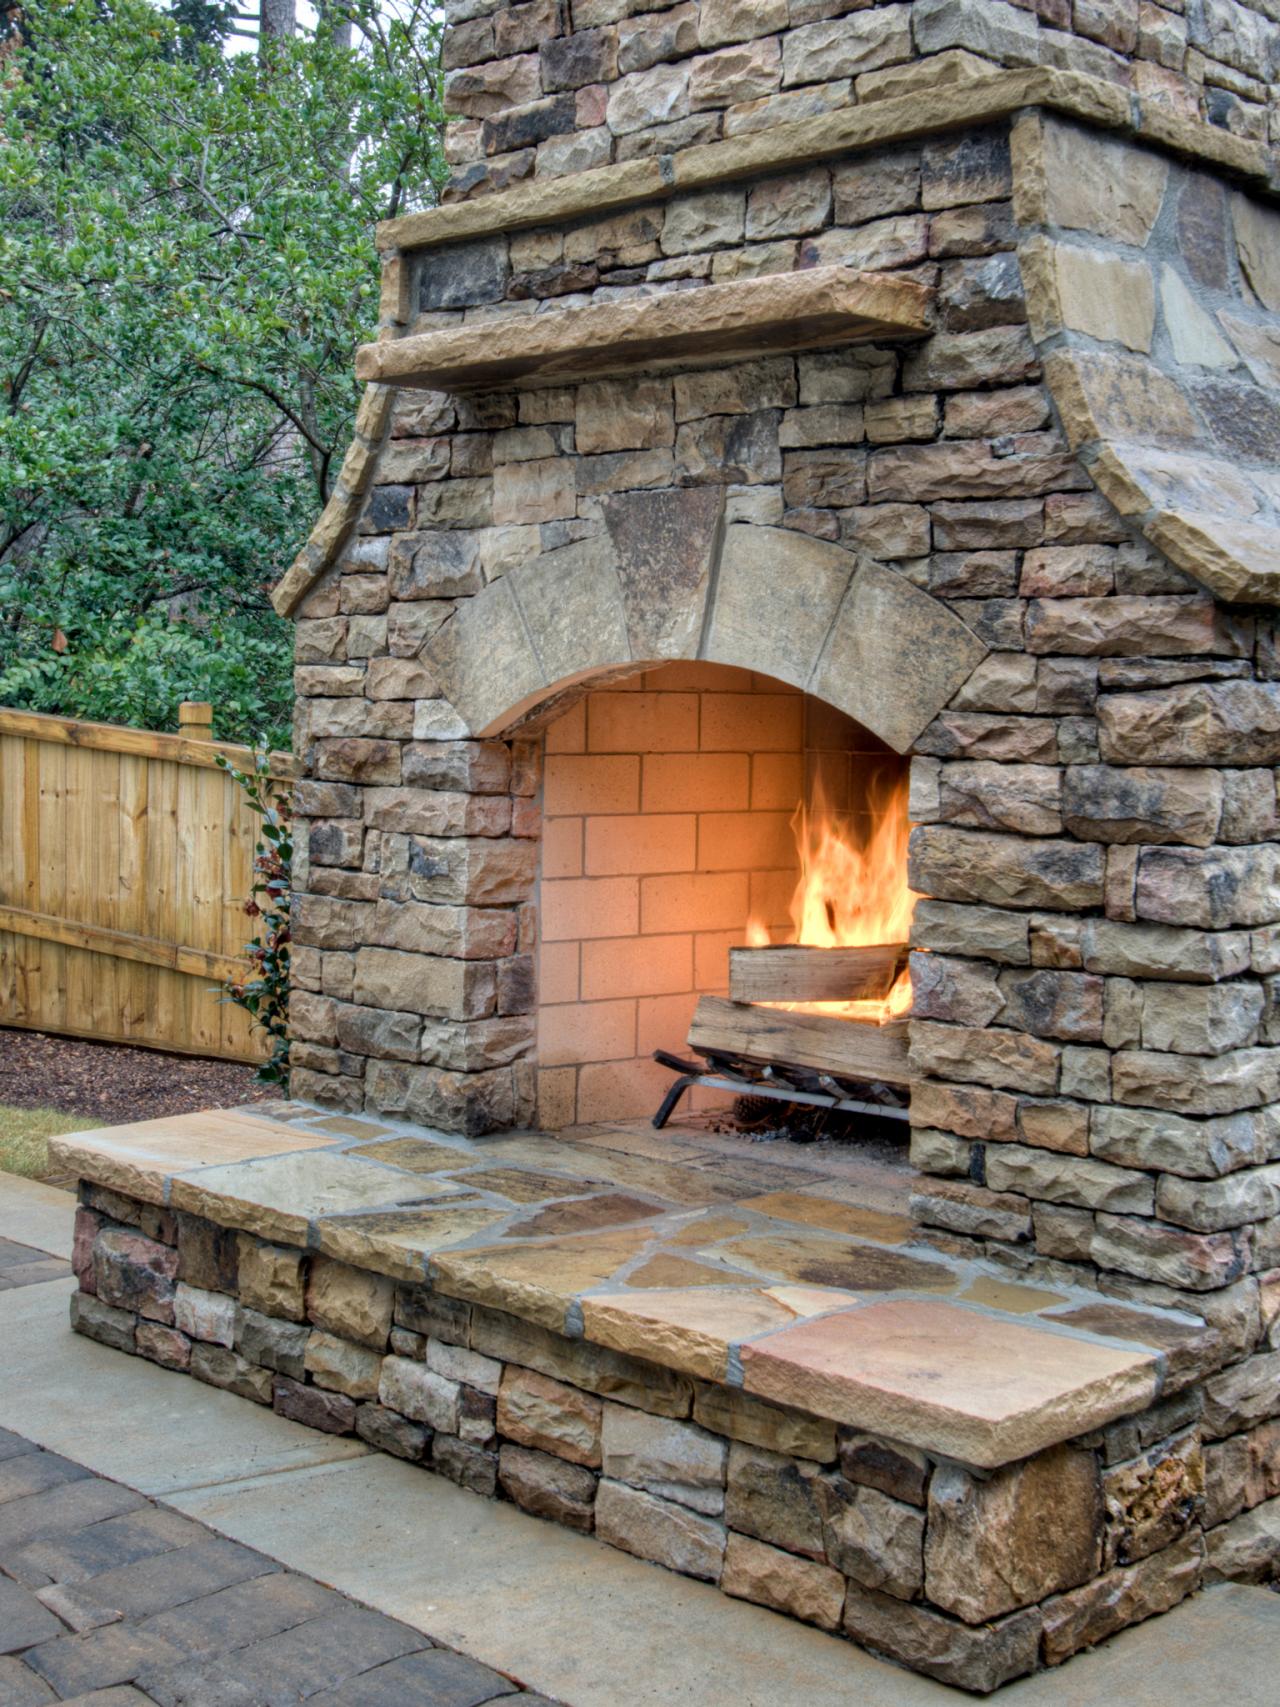 How To Build An Outdoor Fireplace Hgtv